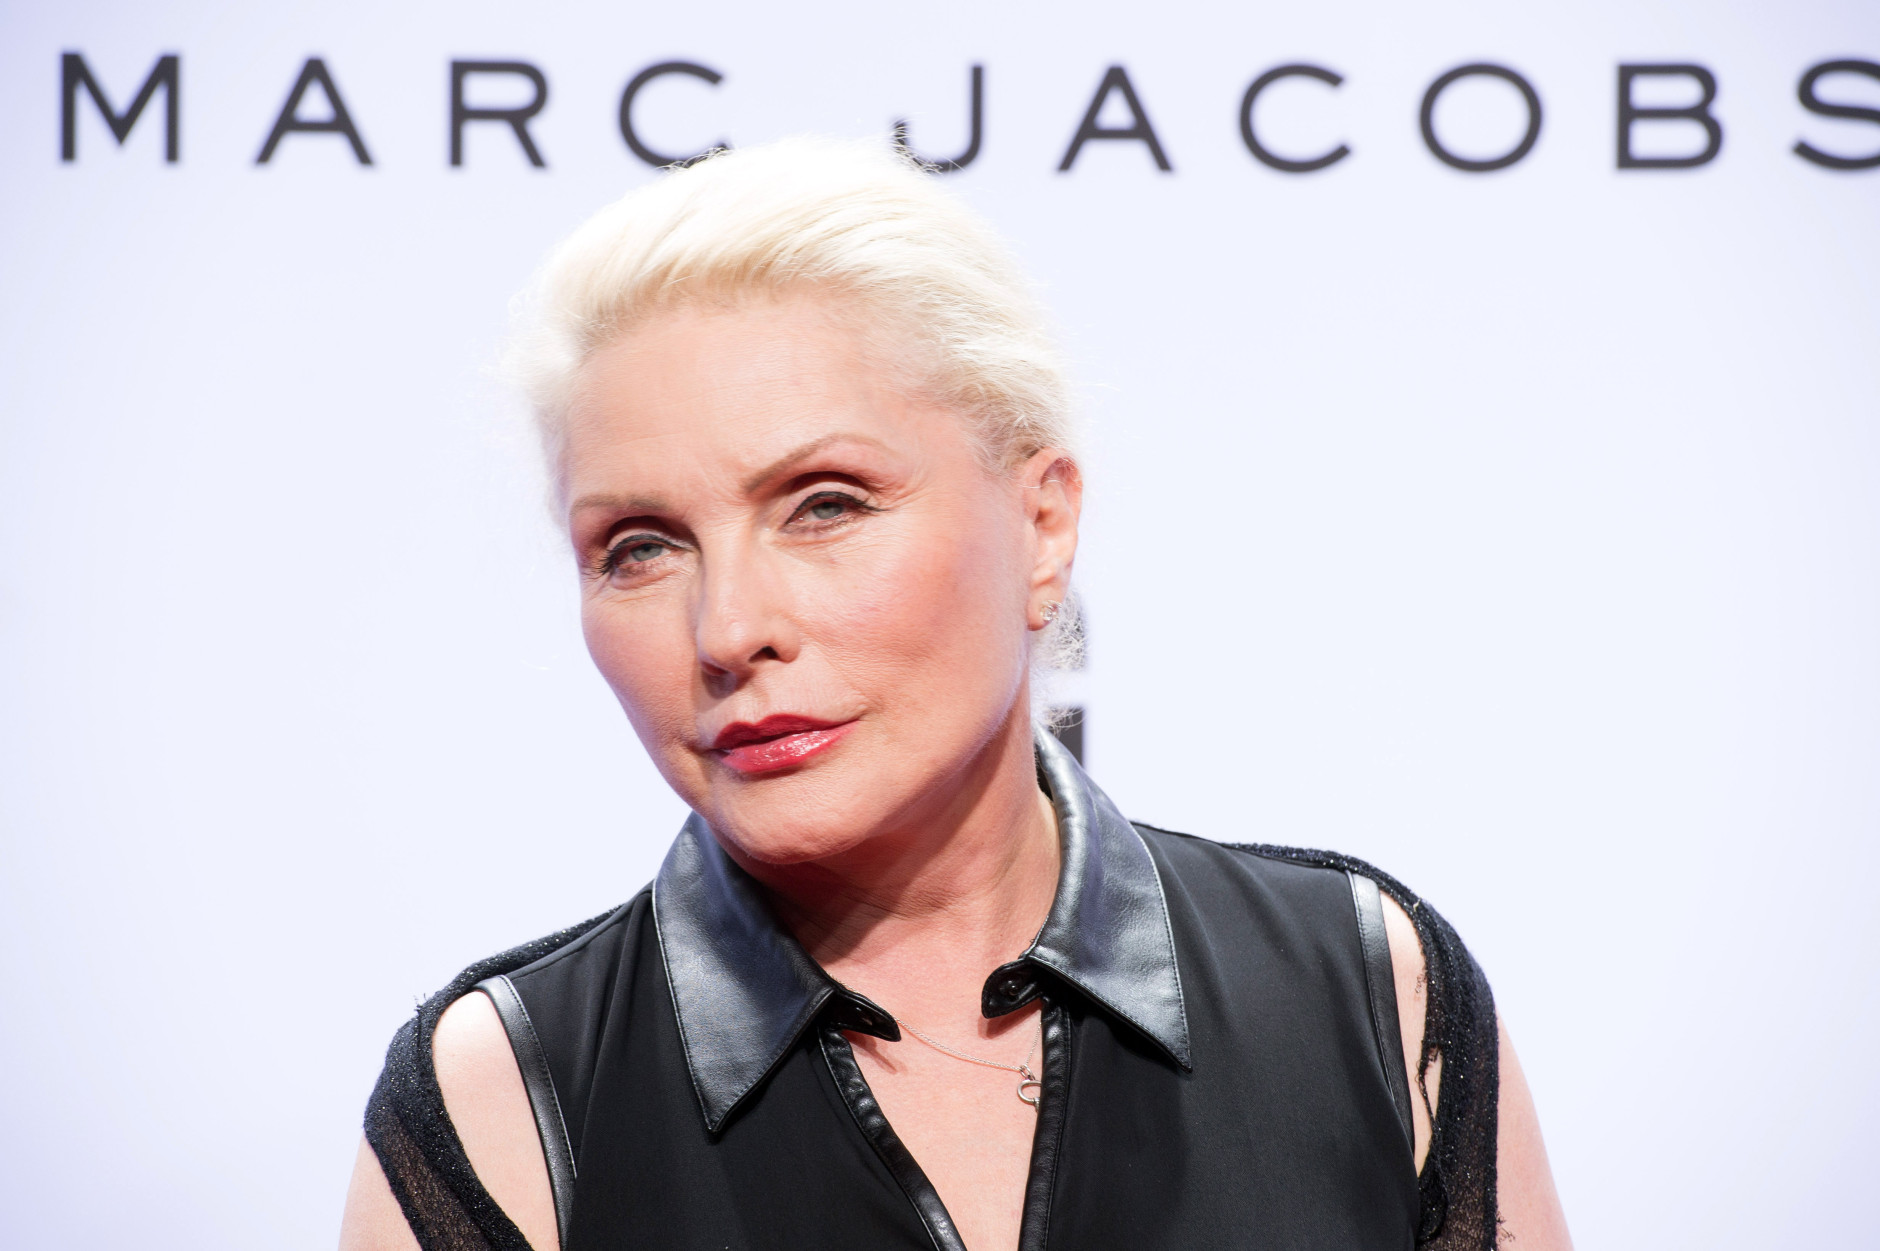 Debbie Harry appears on the red carpet prior to the Marc Jacobs Spring 2016 collection show during Fashion Week Thursday, Sept. 17, 2015, in New York. (AP Photo/Bryan R. Smith)